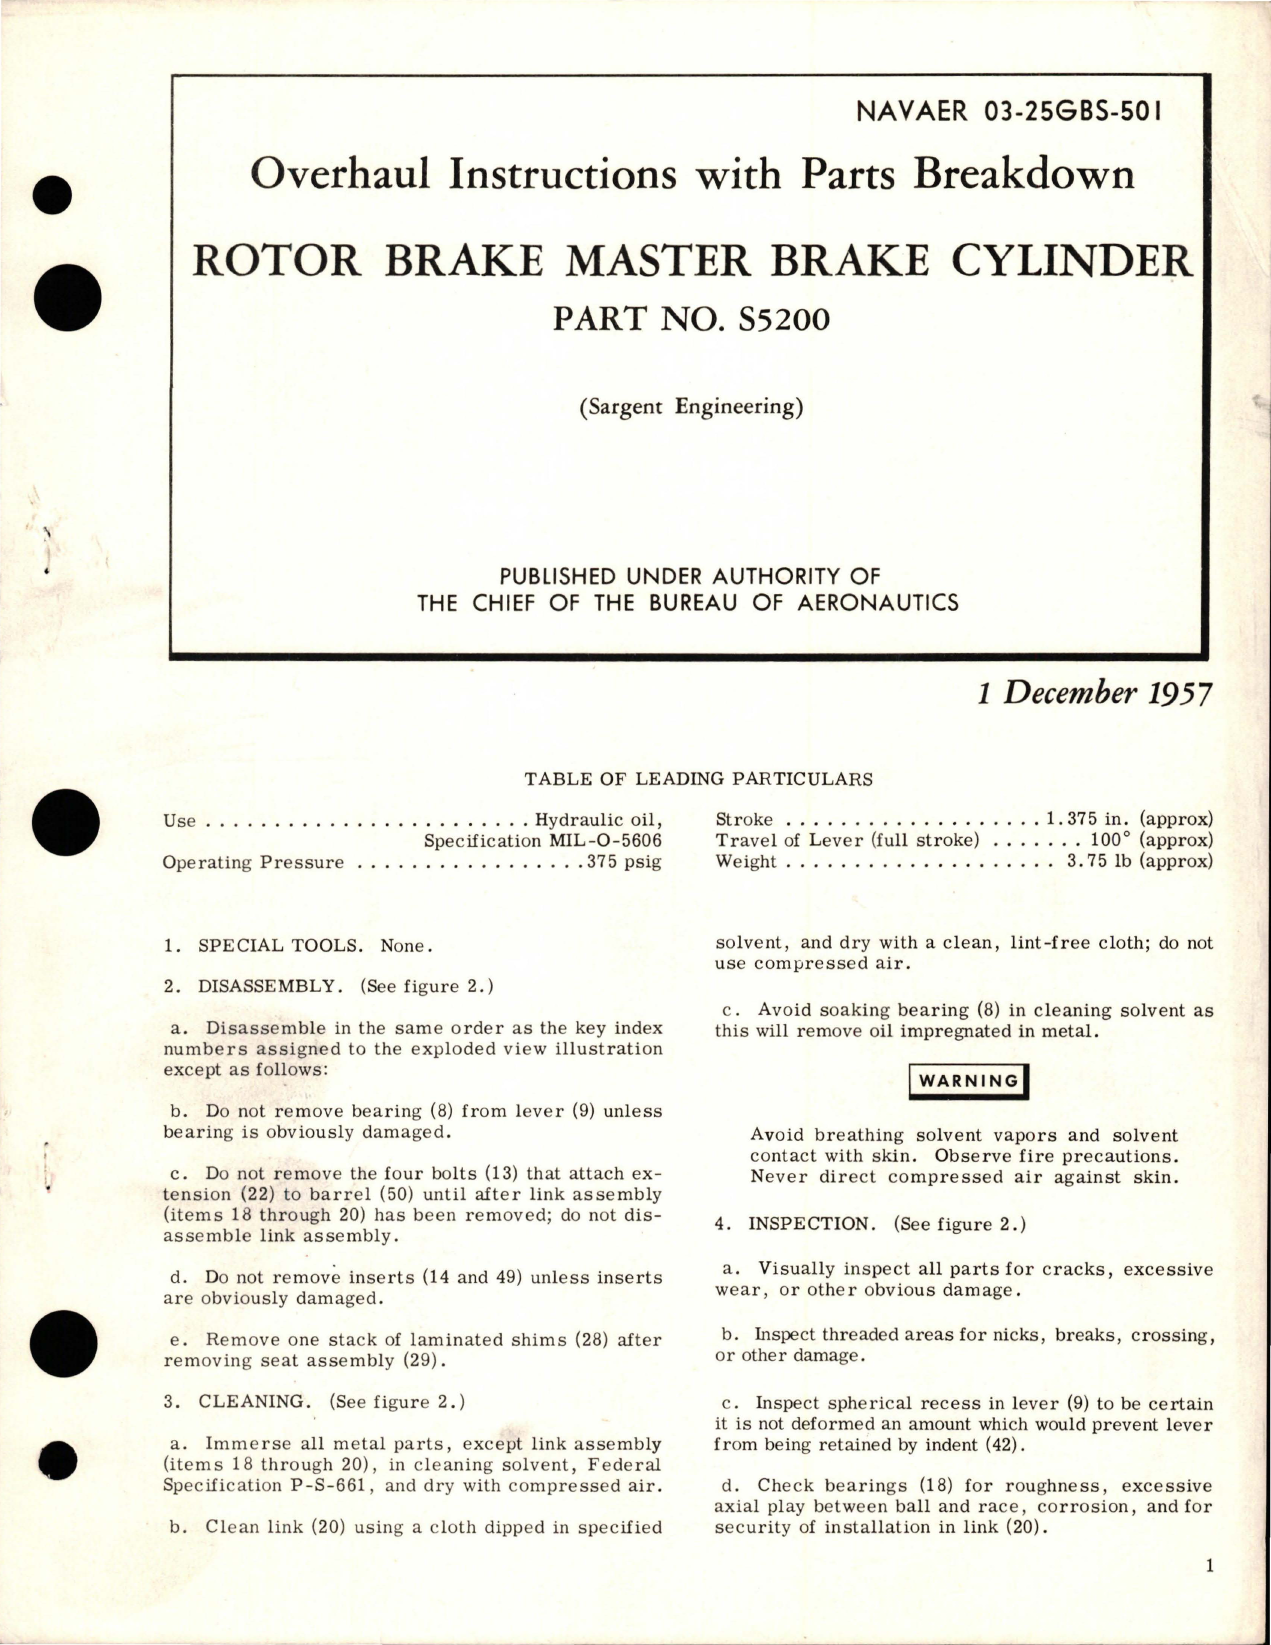 Sample page 1 from AirCorps Library document: Overhaul Instructions with Parts Breakdown for Rotor Brake Master Brake Cylinder - Part S5200